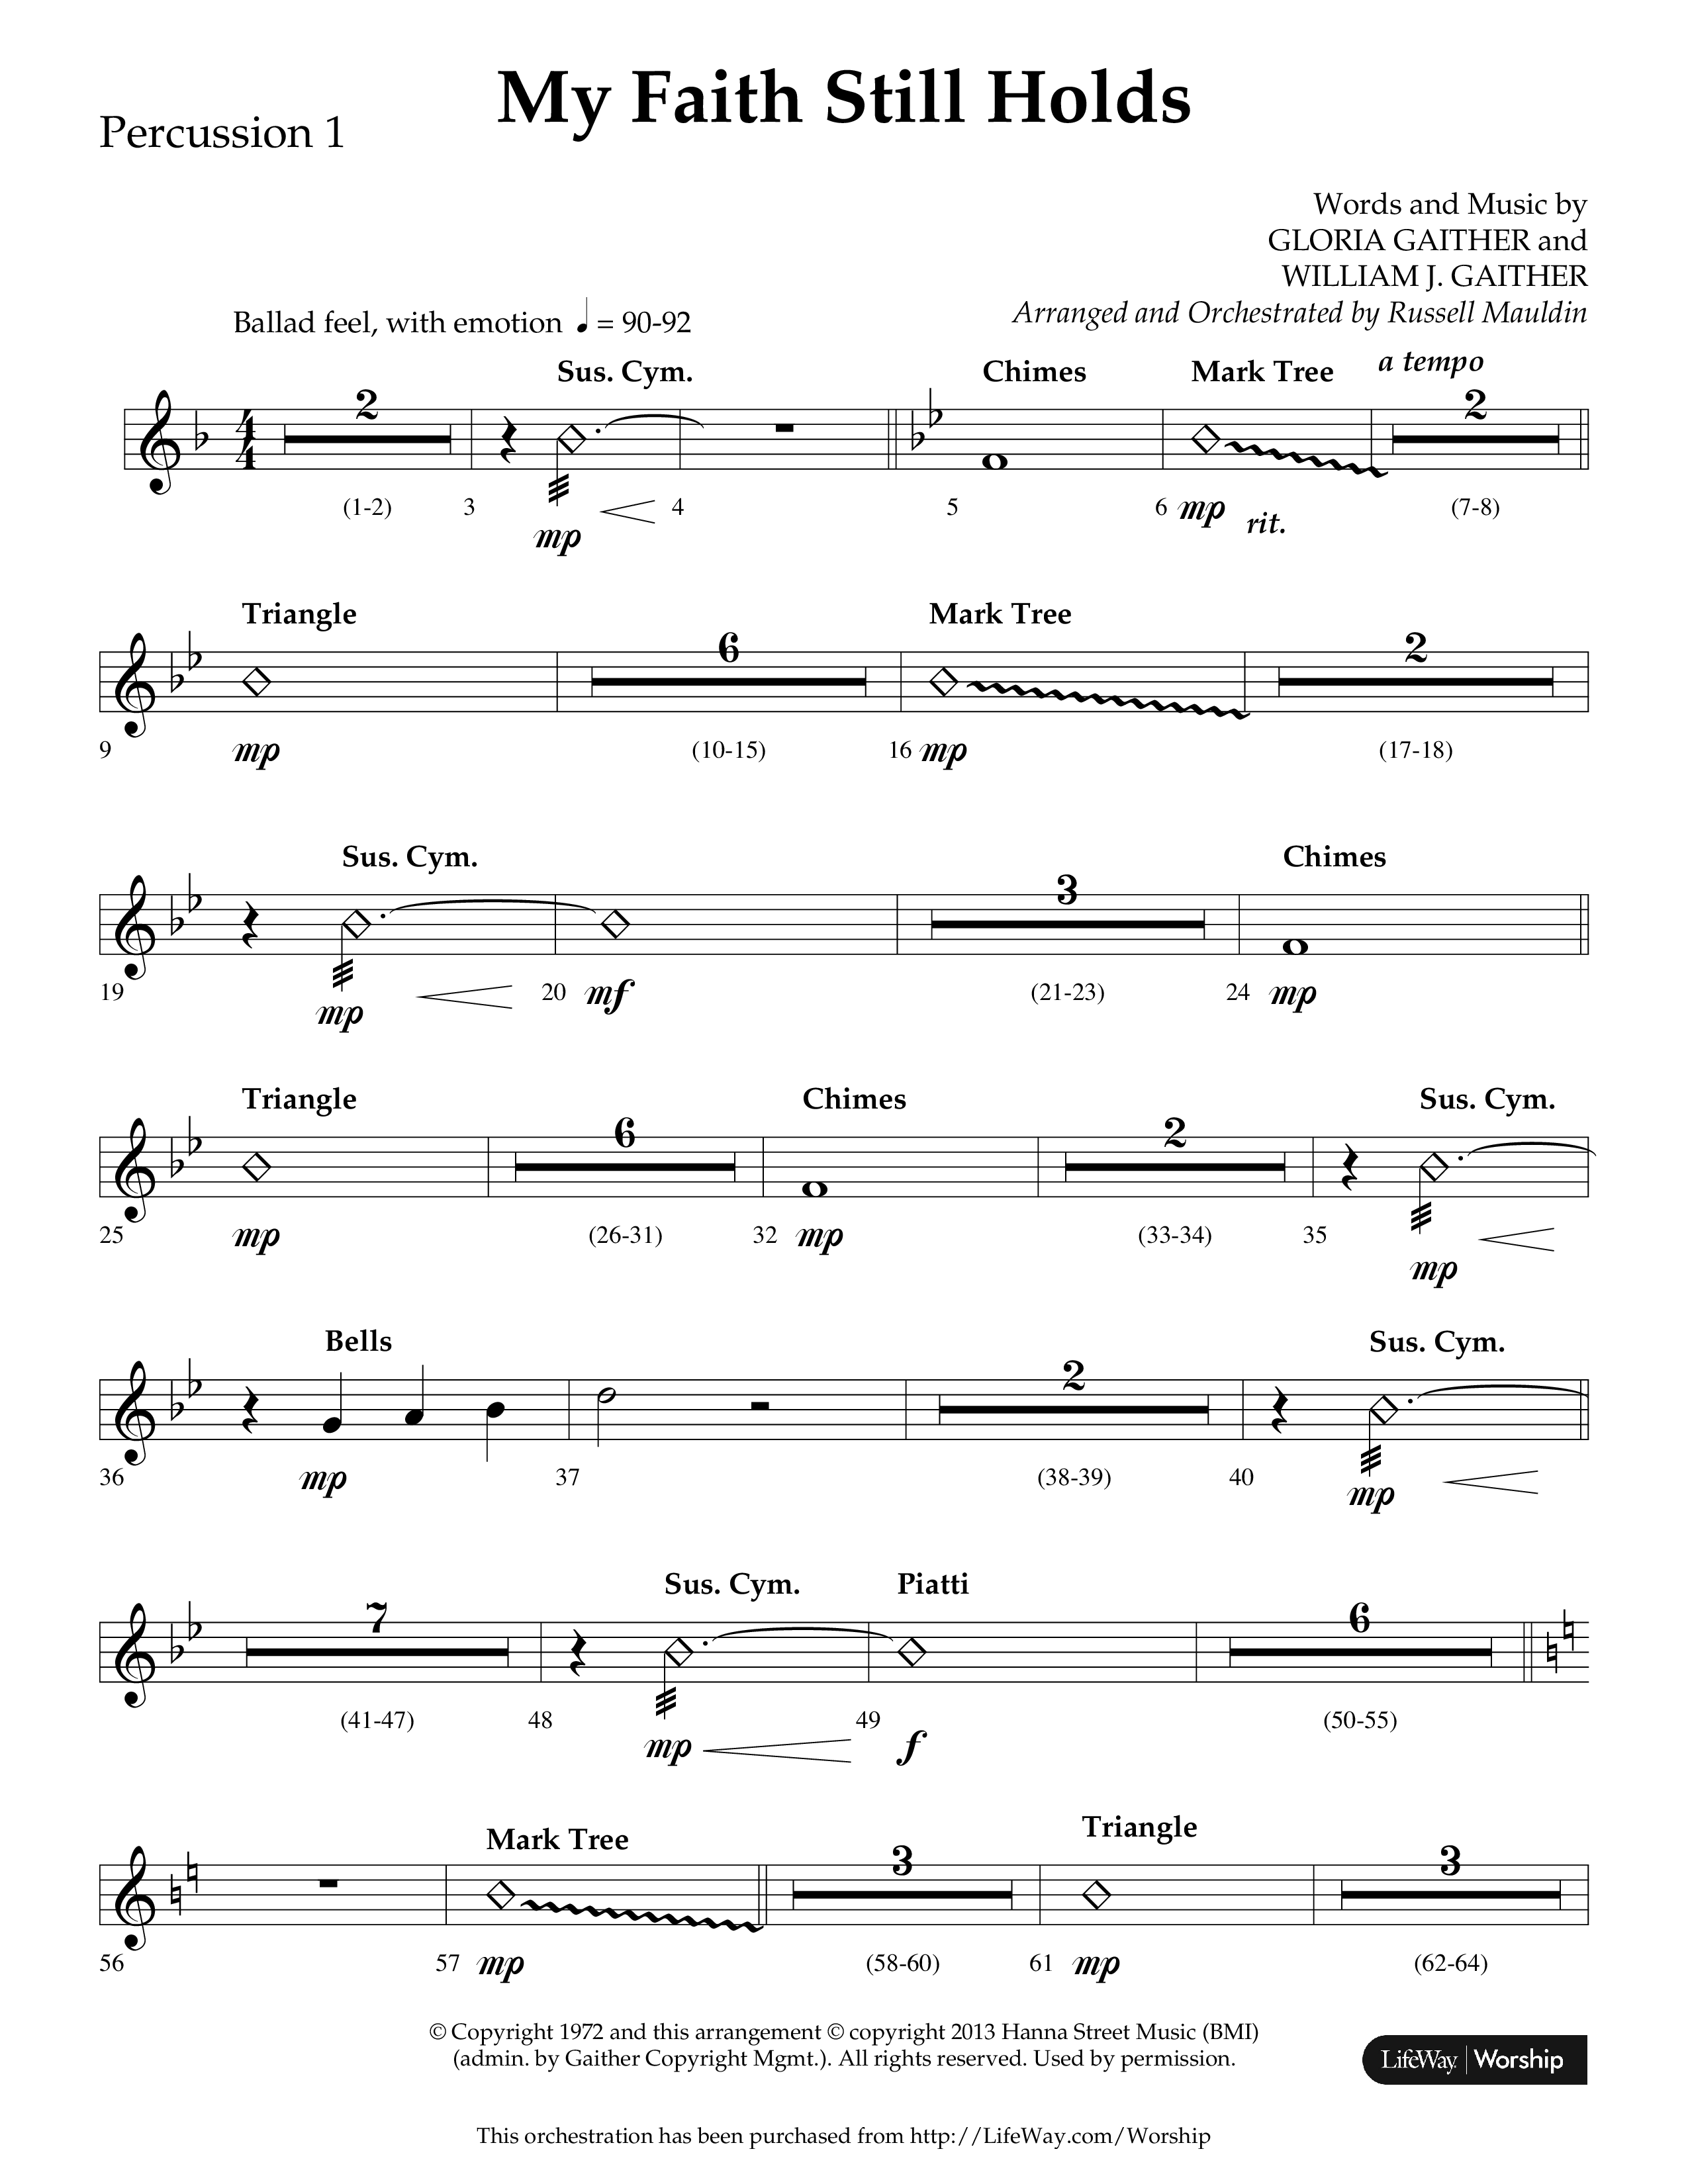 My Faith Still Holds (Choral Anthem SATB) Percussion 1/2 (Lifeway Choral / Arr. Russell Mauldin)